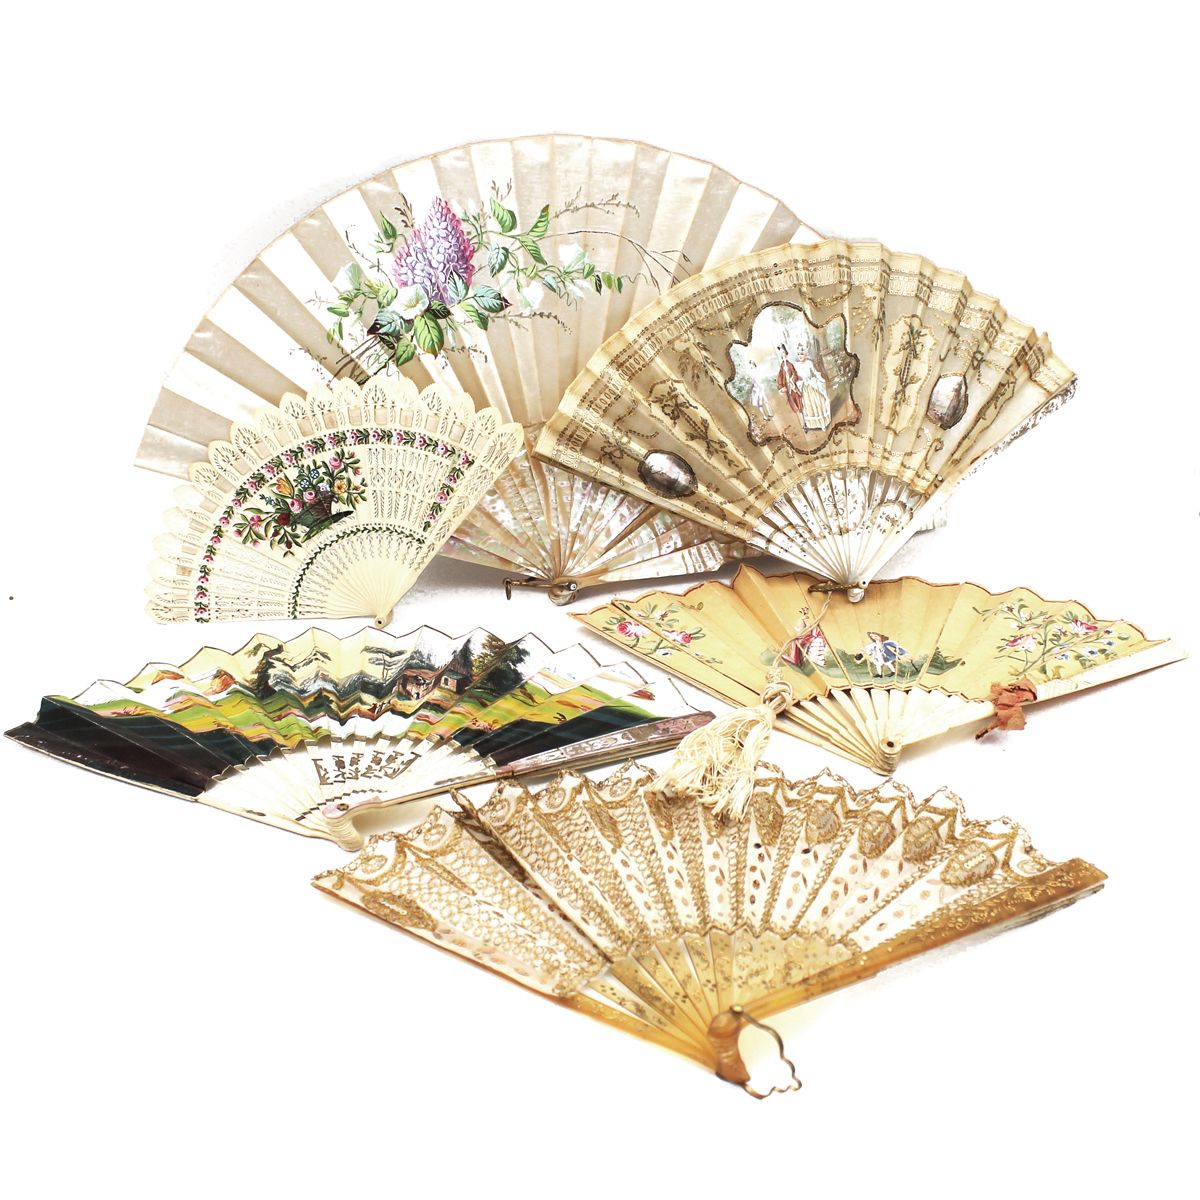 LOTTO DI SEI VENTAGLI - LOT OF SIX FANS Various materials and sizes
Various mate&hellip;